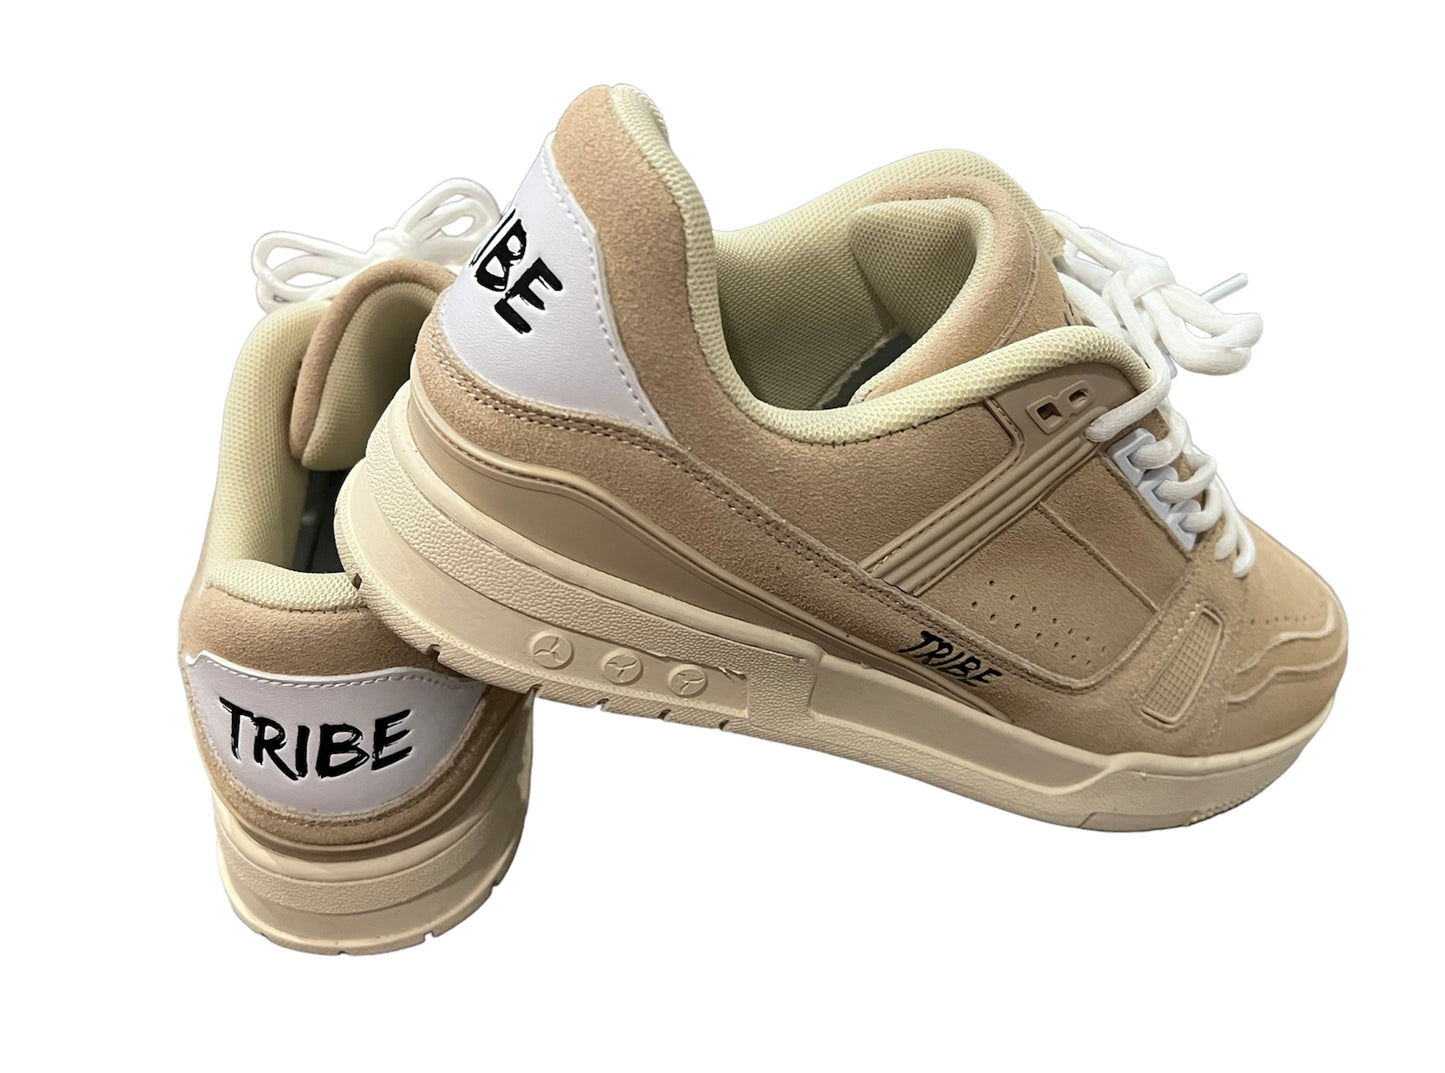 TRIBE TRAINER “7 HRS”